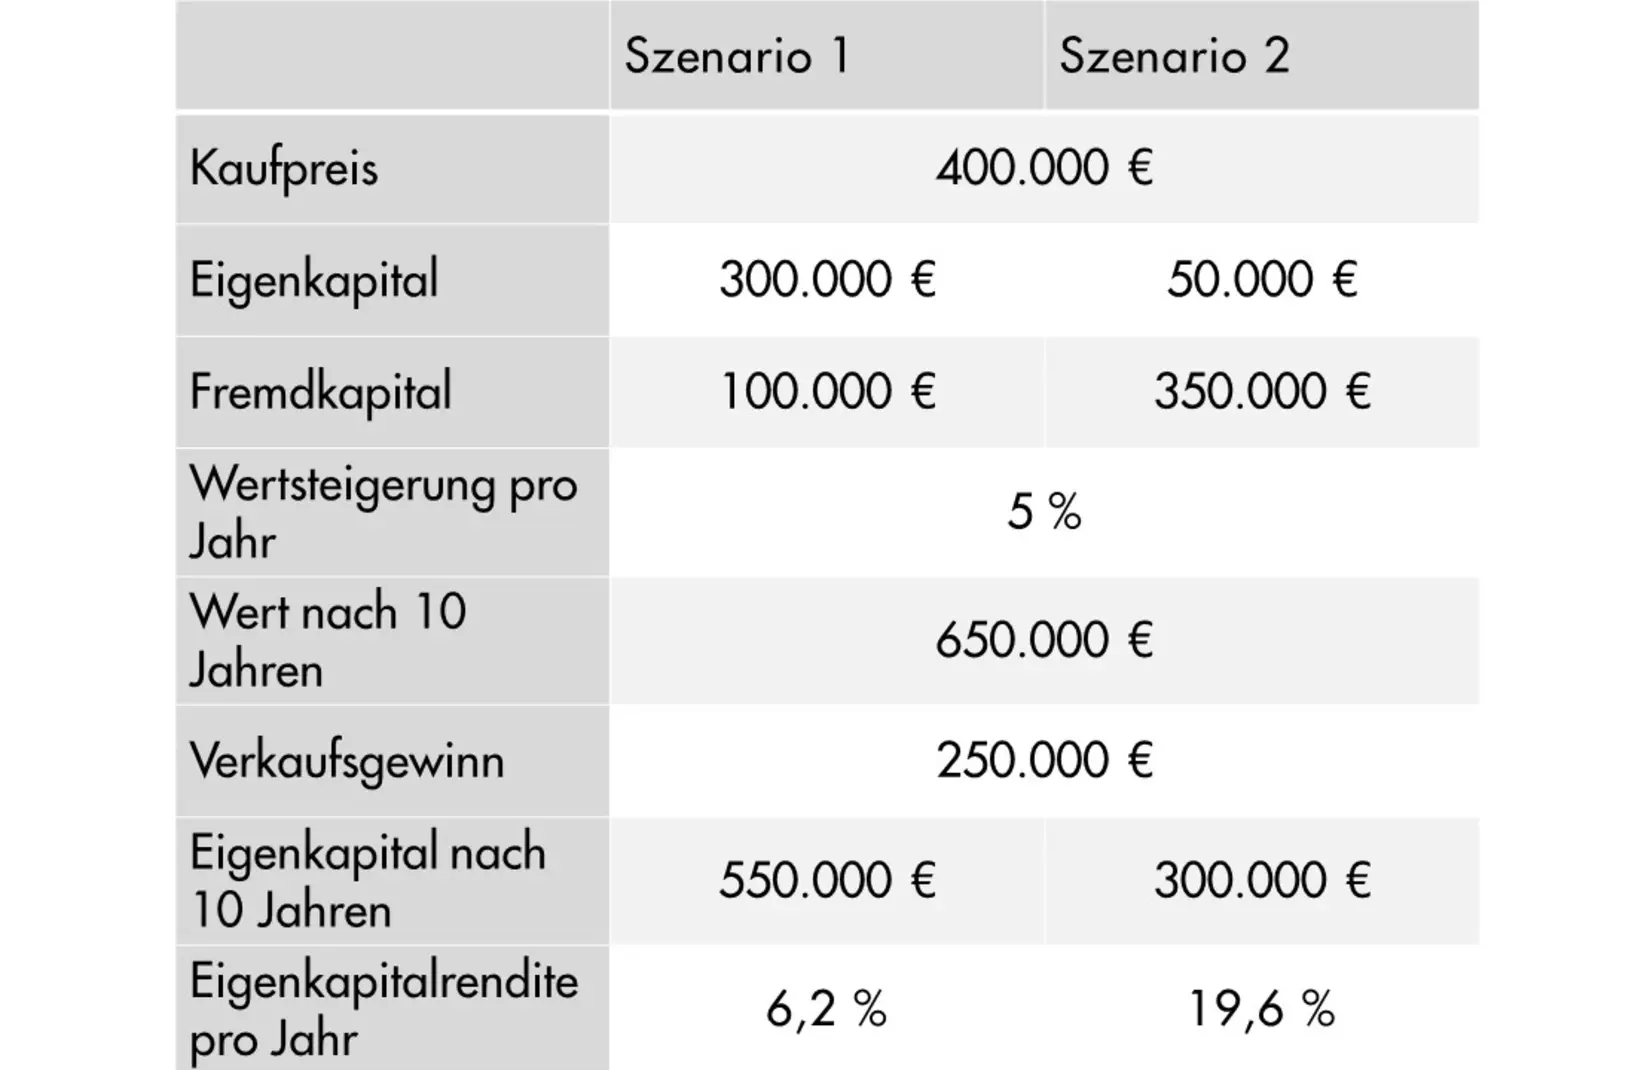 Comparison between the two scenarios for the example calculation of the leverage effect